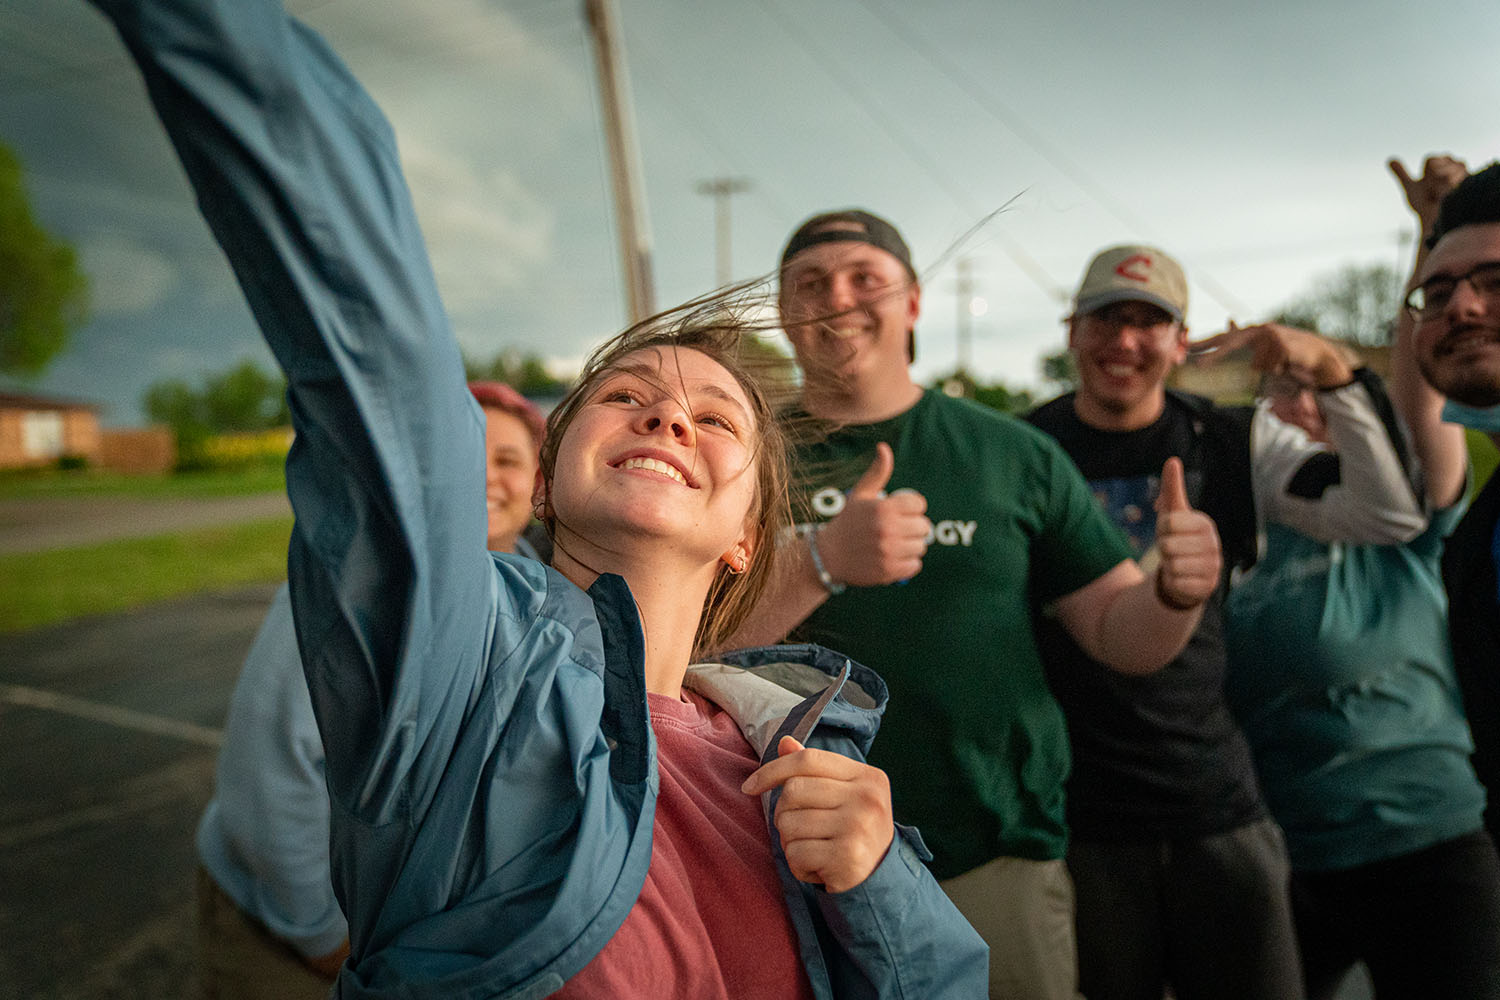 Ohio University meteorology students Emily Dietz (front), Hunter Uhl, Jacob Van Cleave, Adam Eckman, Sydney Walters and Nathan Kuhr take a selfie.